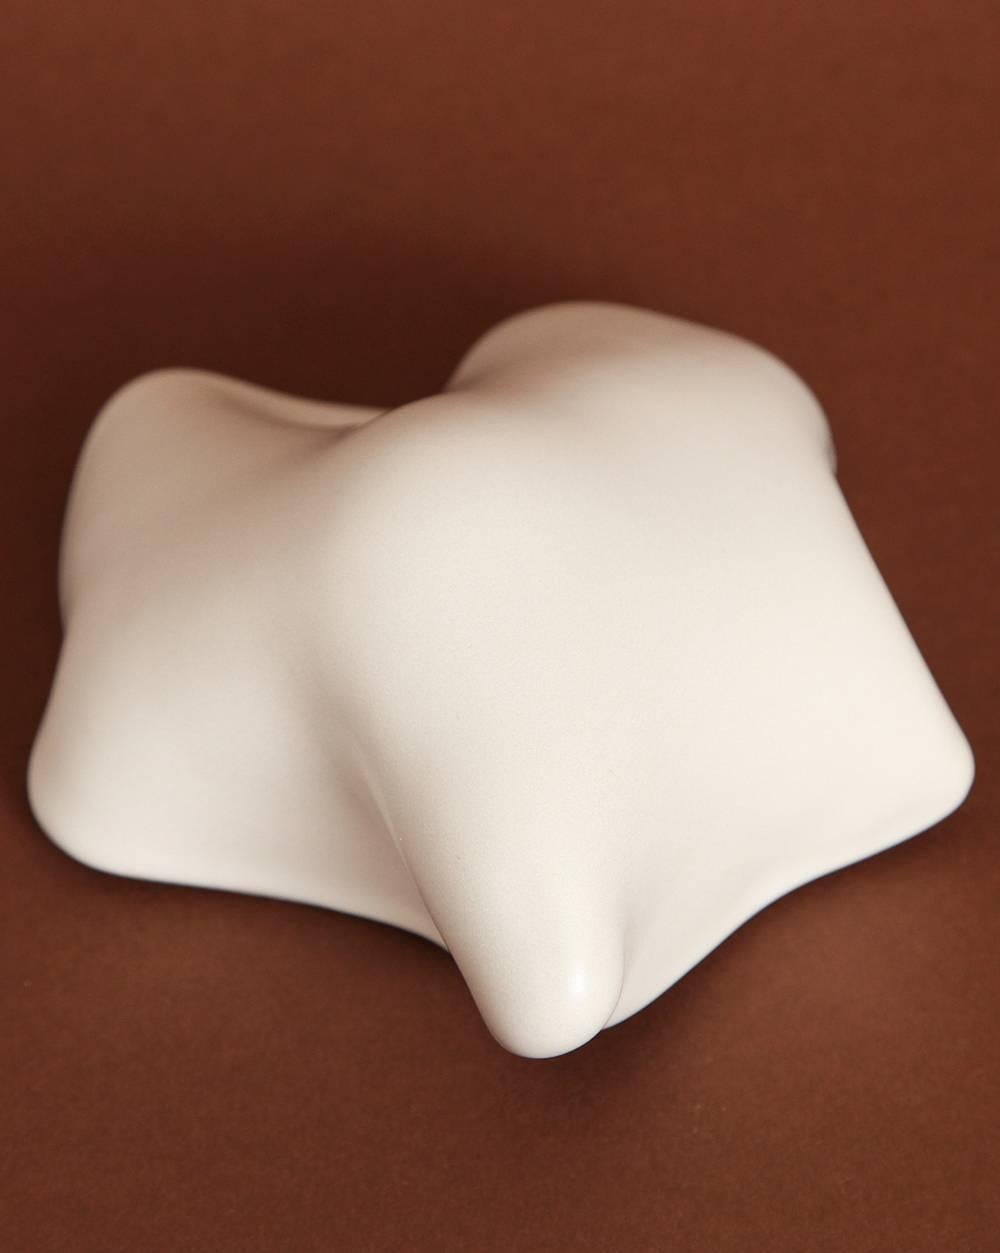 Sandra Zeenni.
“Nobe Blanche Otra”, 2014.
Small earthenware object with a smooth white glaze over an ivory clay body.
These pieces are meant to be touched and feel beautiful in your hand.
Signed SaZe.
2